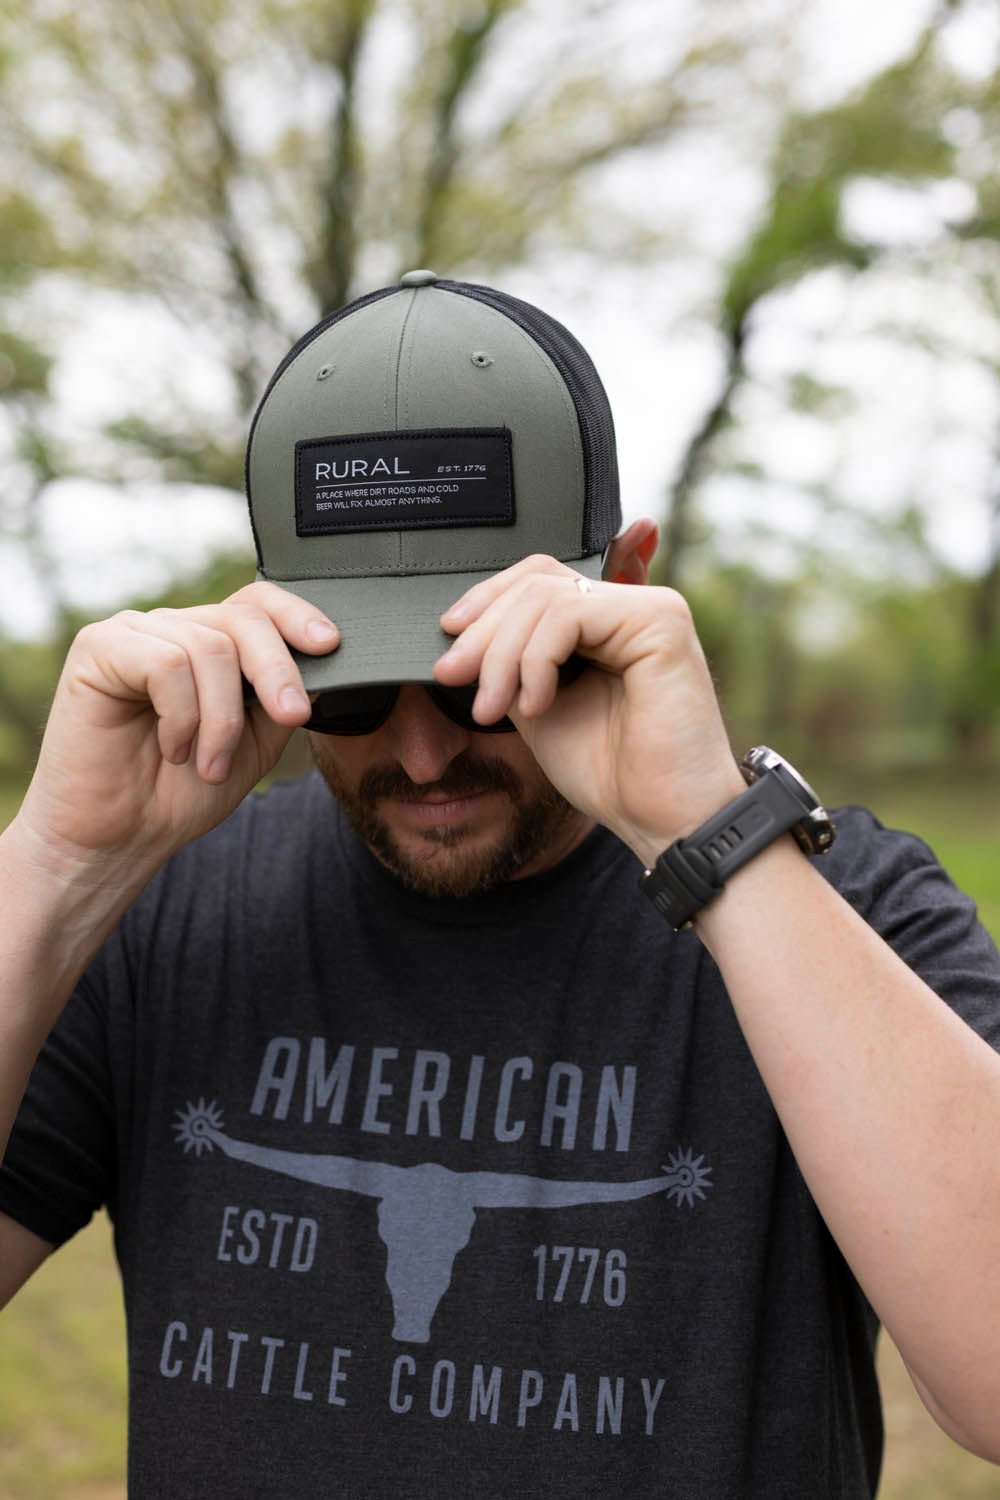 A person wearing a gray cap and a black "Rural Cloth Bull Spurs Tee-Black Frost" shirt adjusts the brim of the cap with both hands. The premium weight fabric of the shirt hints at its quality, and the background features blurred greenery.